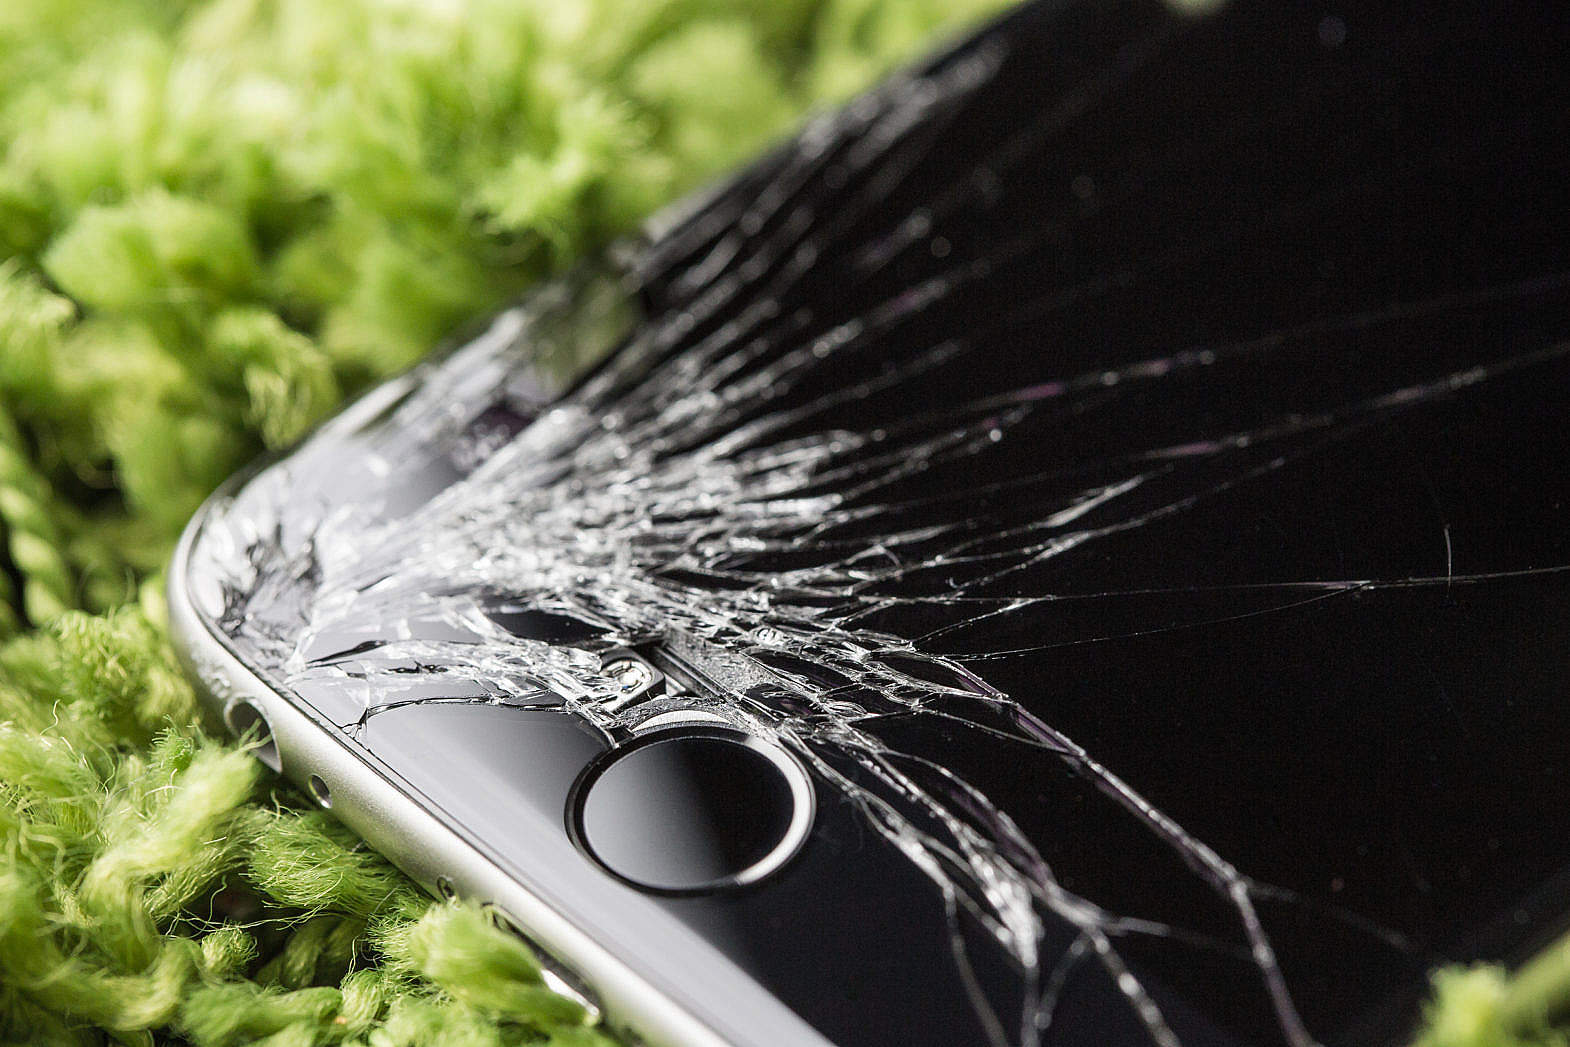 Dropped iPhone 6 with Cracked Screen Close Up Free Stock Photo | picjumbo